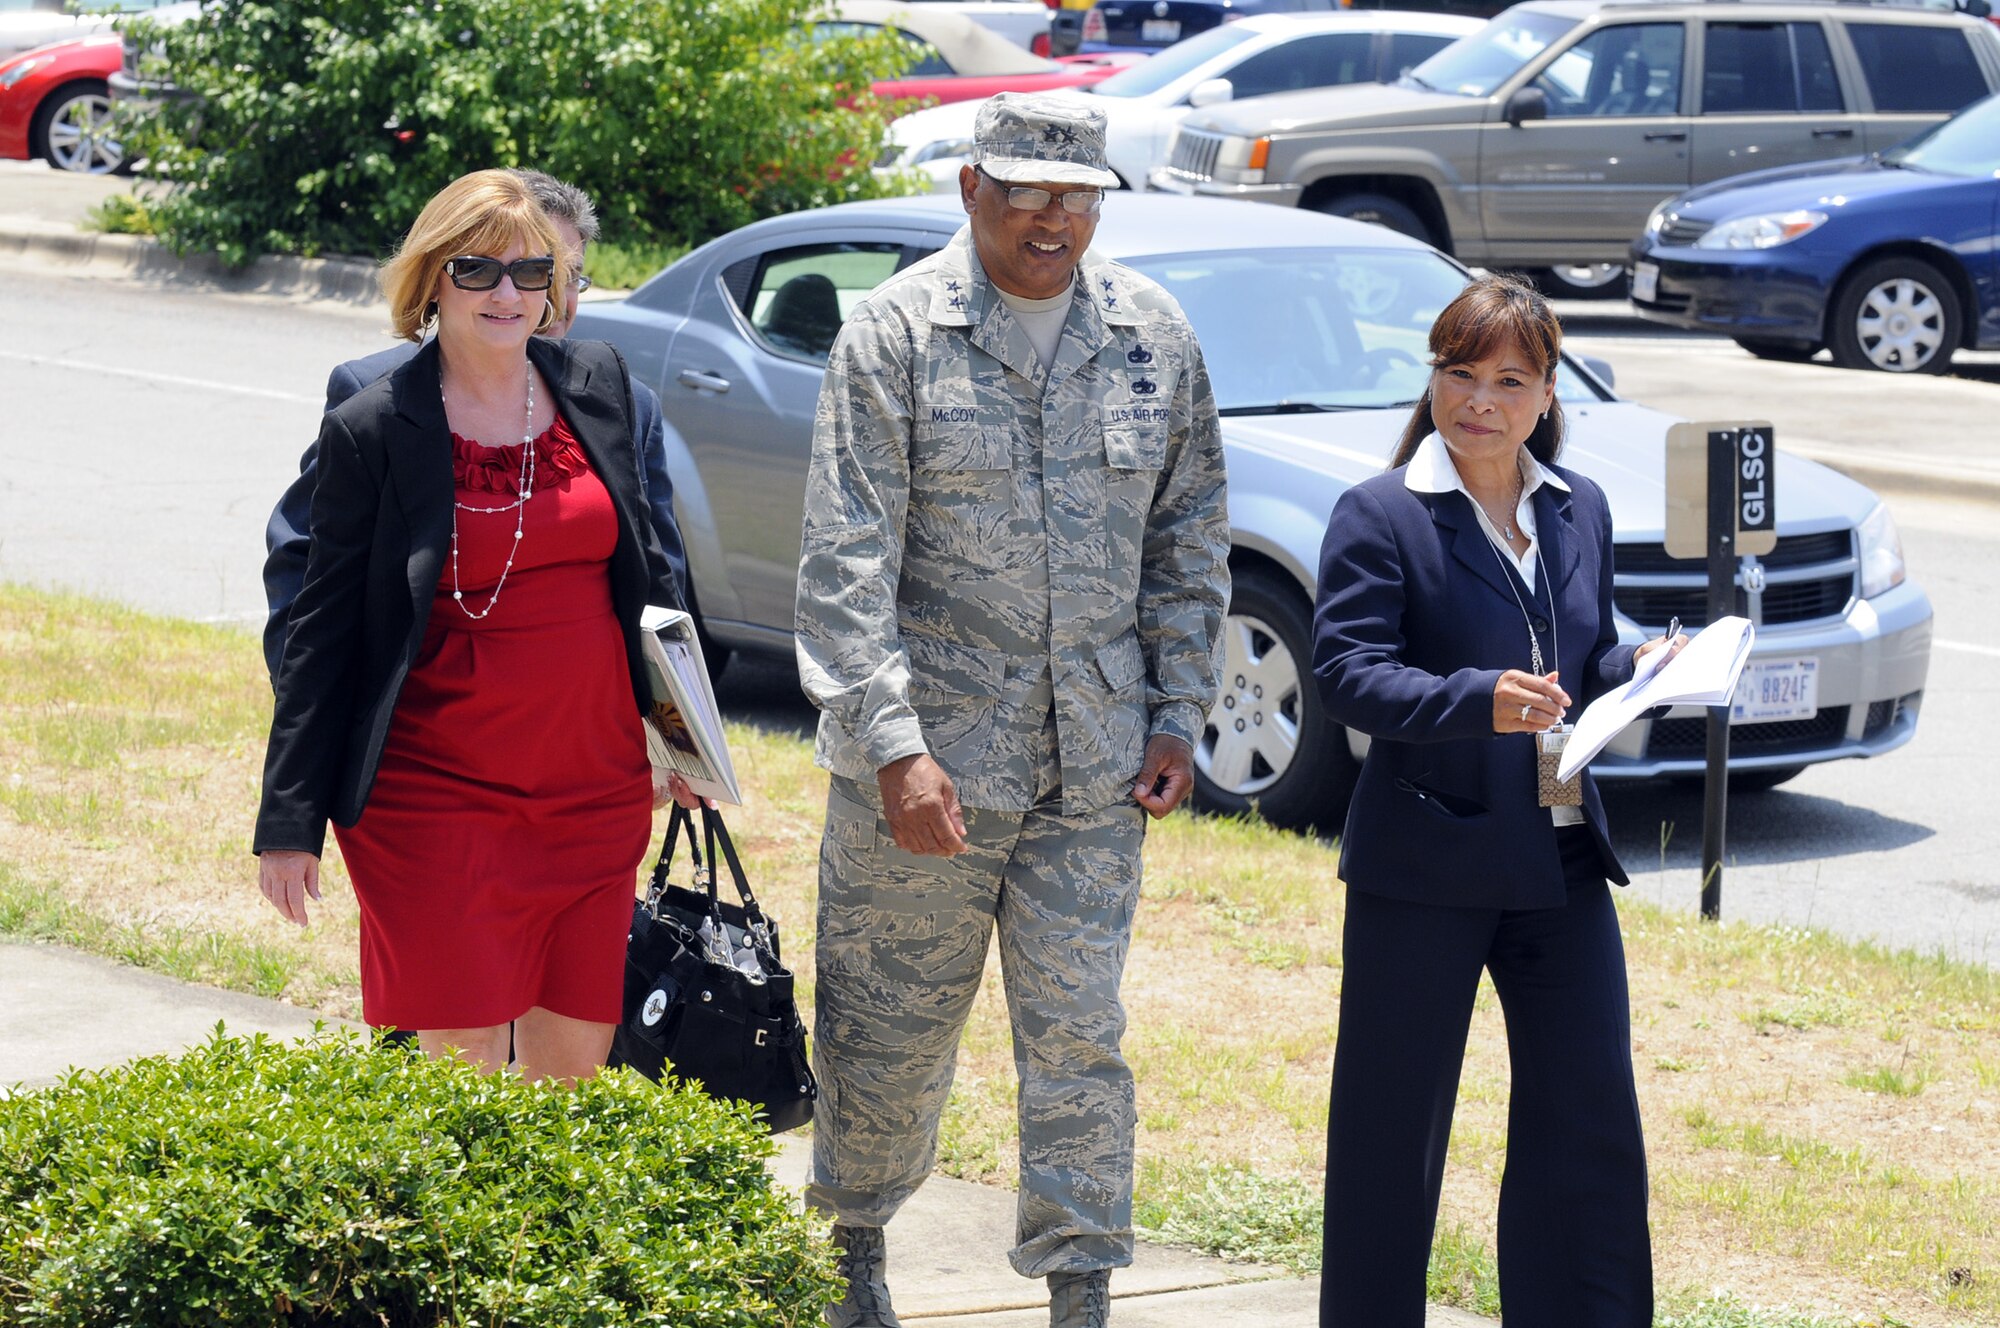 Maj. Gen.Gary T. McCoy (center) walks with Bonnie Jones and Susan Agustine during his visit to Robins. U. S. Air Force photo by Sue Sapp